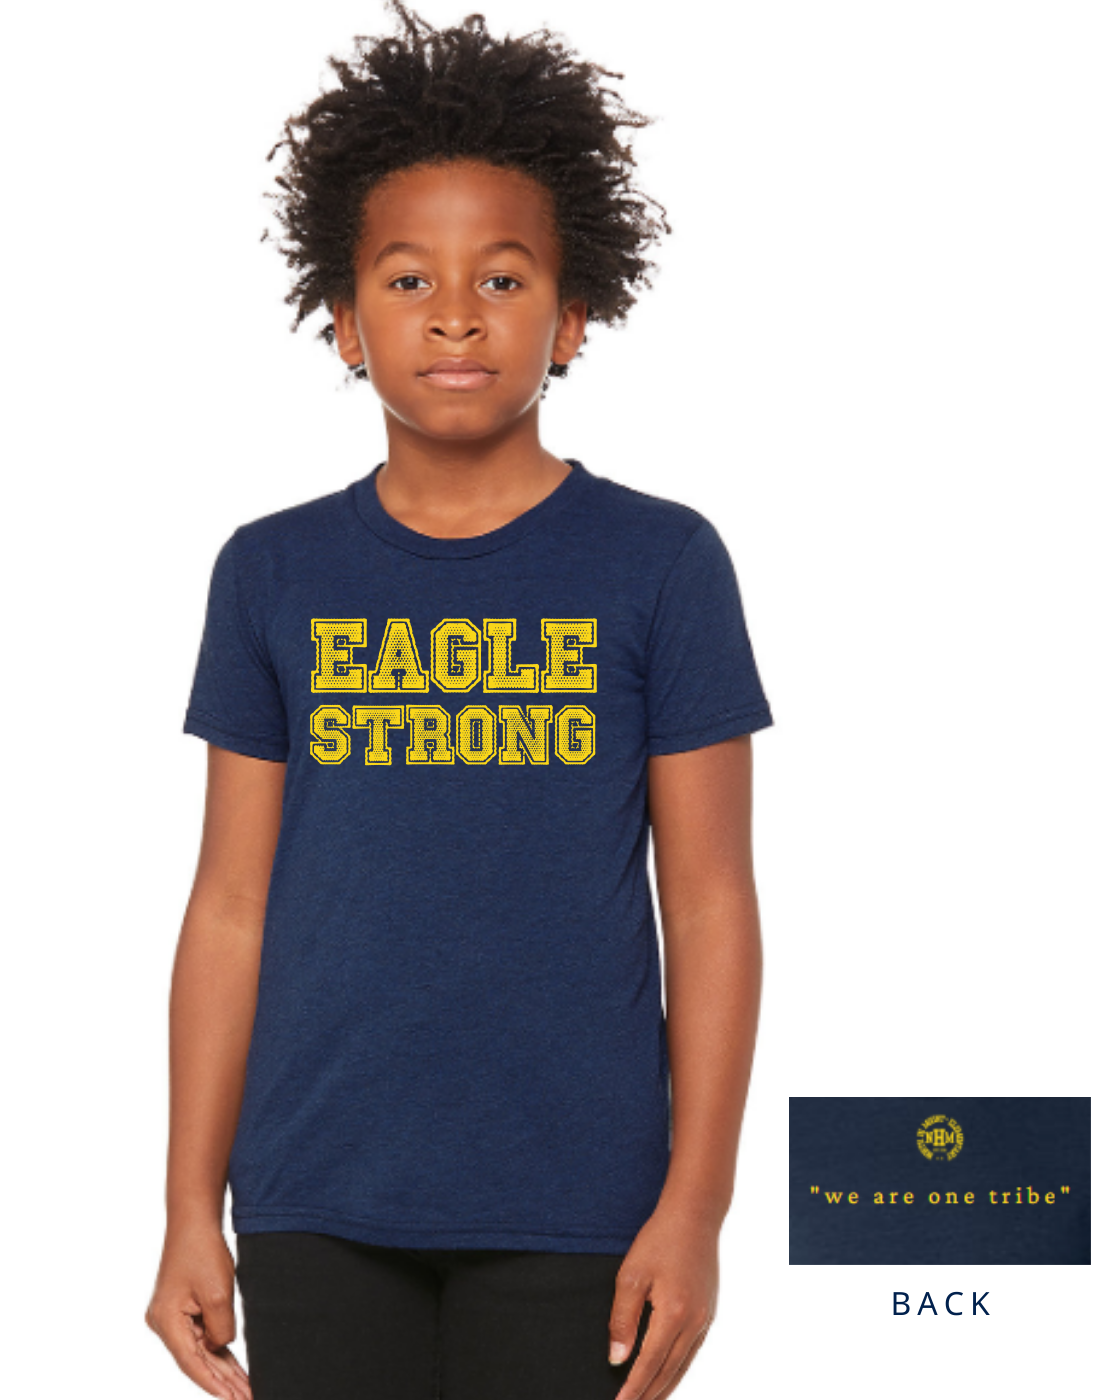 NHM 2020 Eagle Strong Youth Front with Back.png